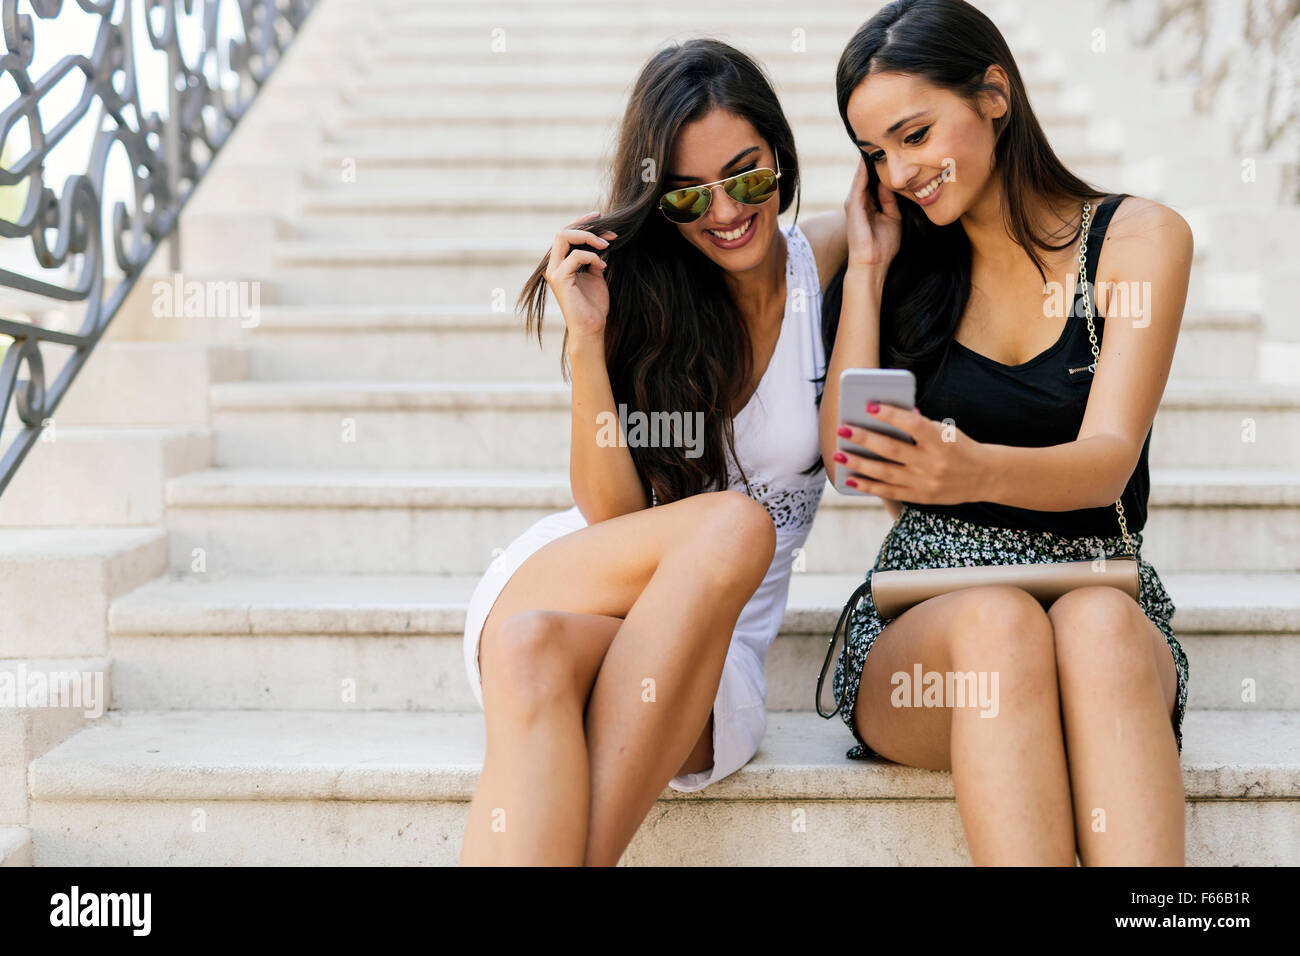 Beautiful women looking at phone and smiling while reading the contents Stock Photo